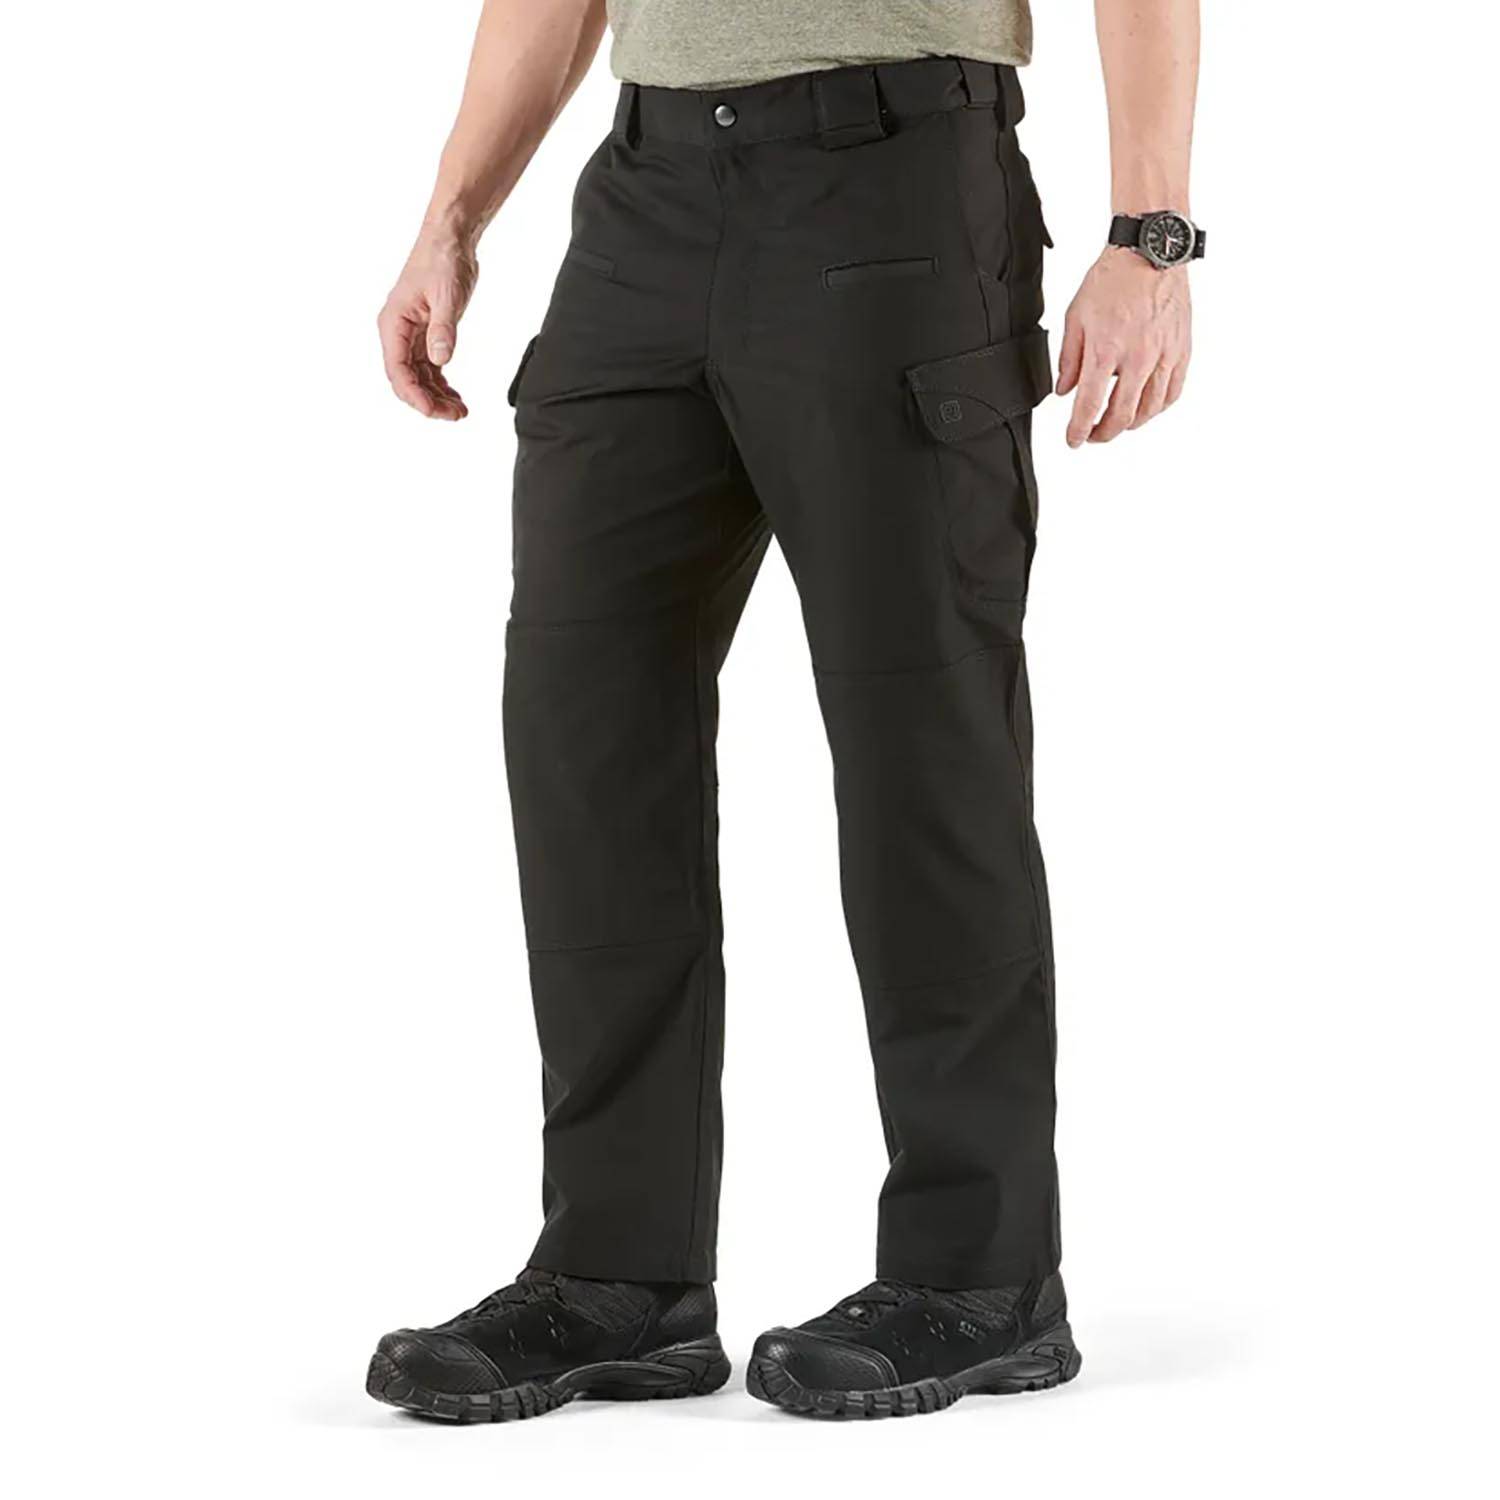 Clearance Under $5 Clothing Man,AXXD Cargo Trousers Workwear Cargo 6 Pocket  Full Pantss Sweatpants Size 14-16 Black S 